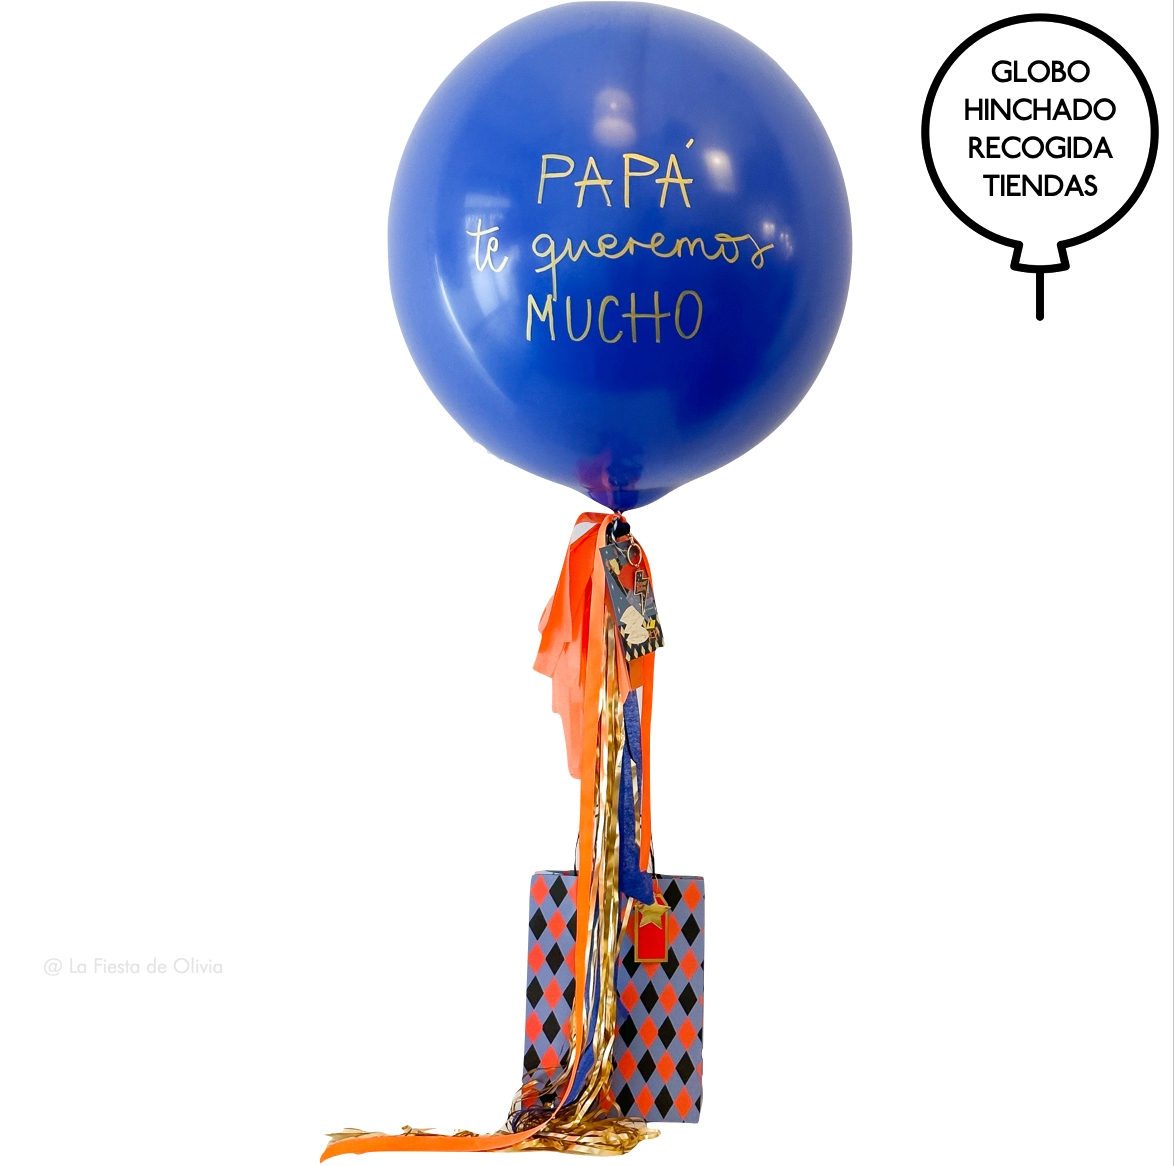 Eco XL DAD balloon keychain inflated with helium